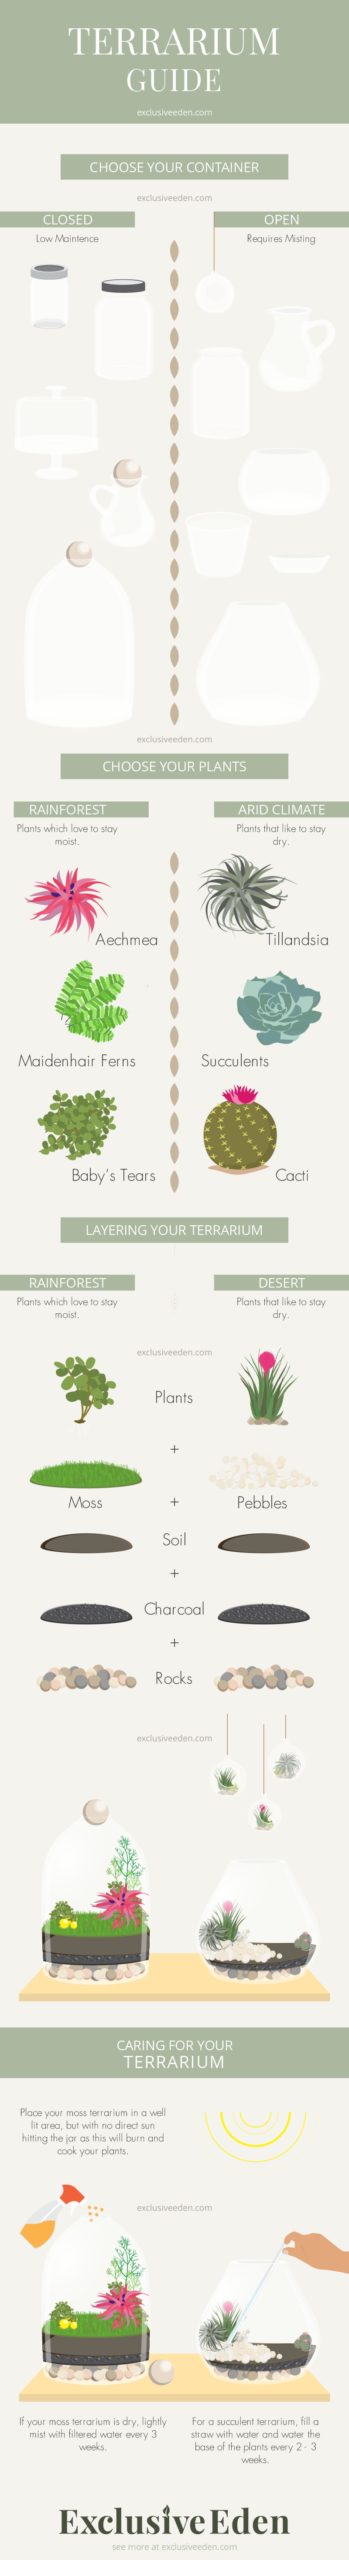 An infographic guide on the different parts of a terrarium.